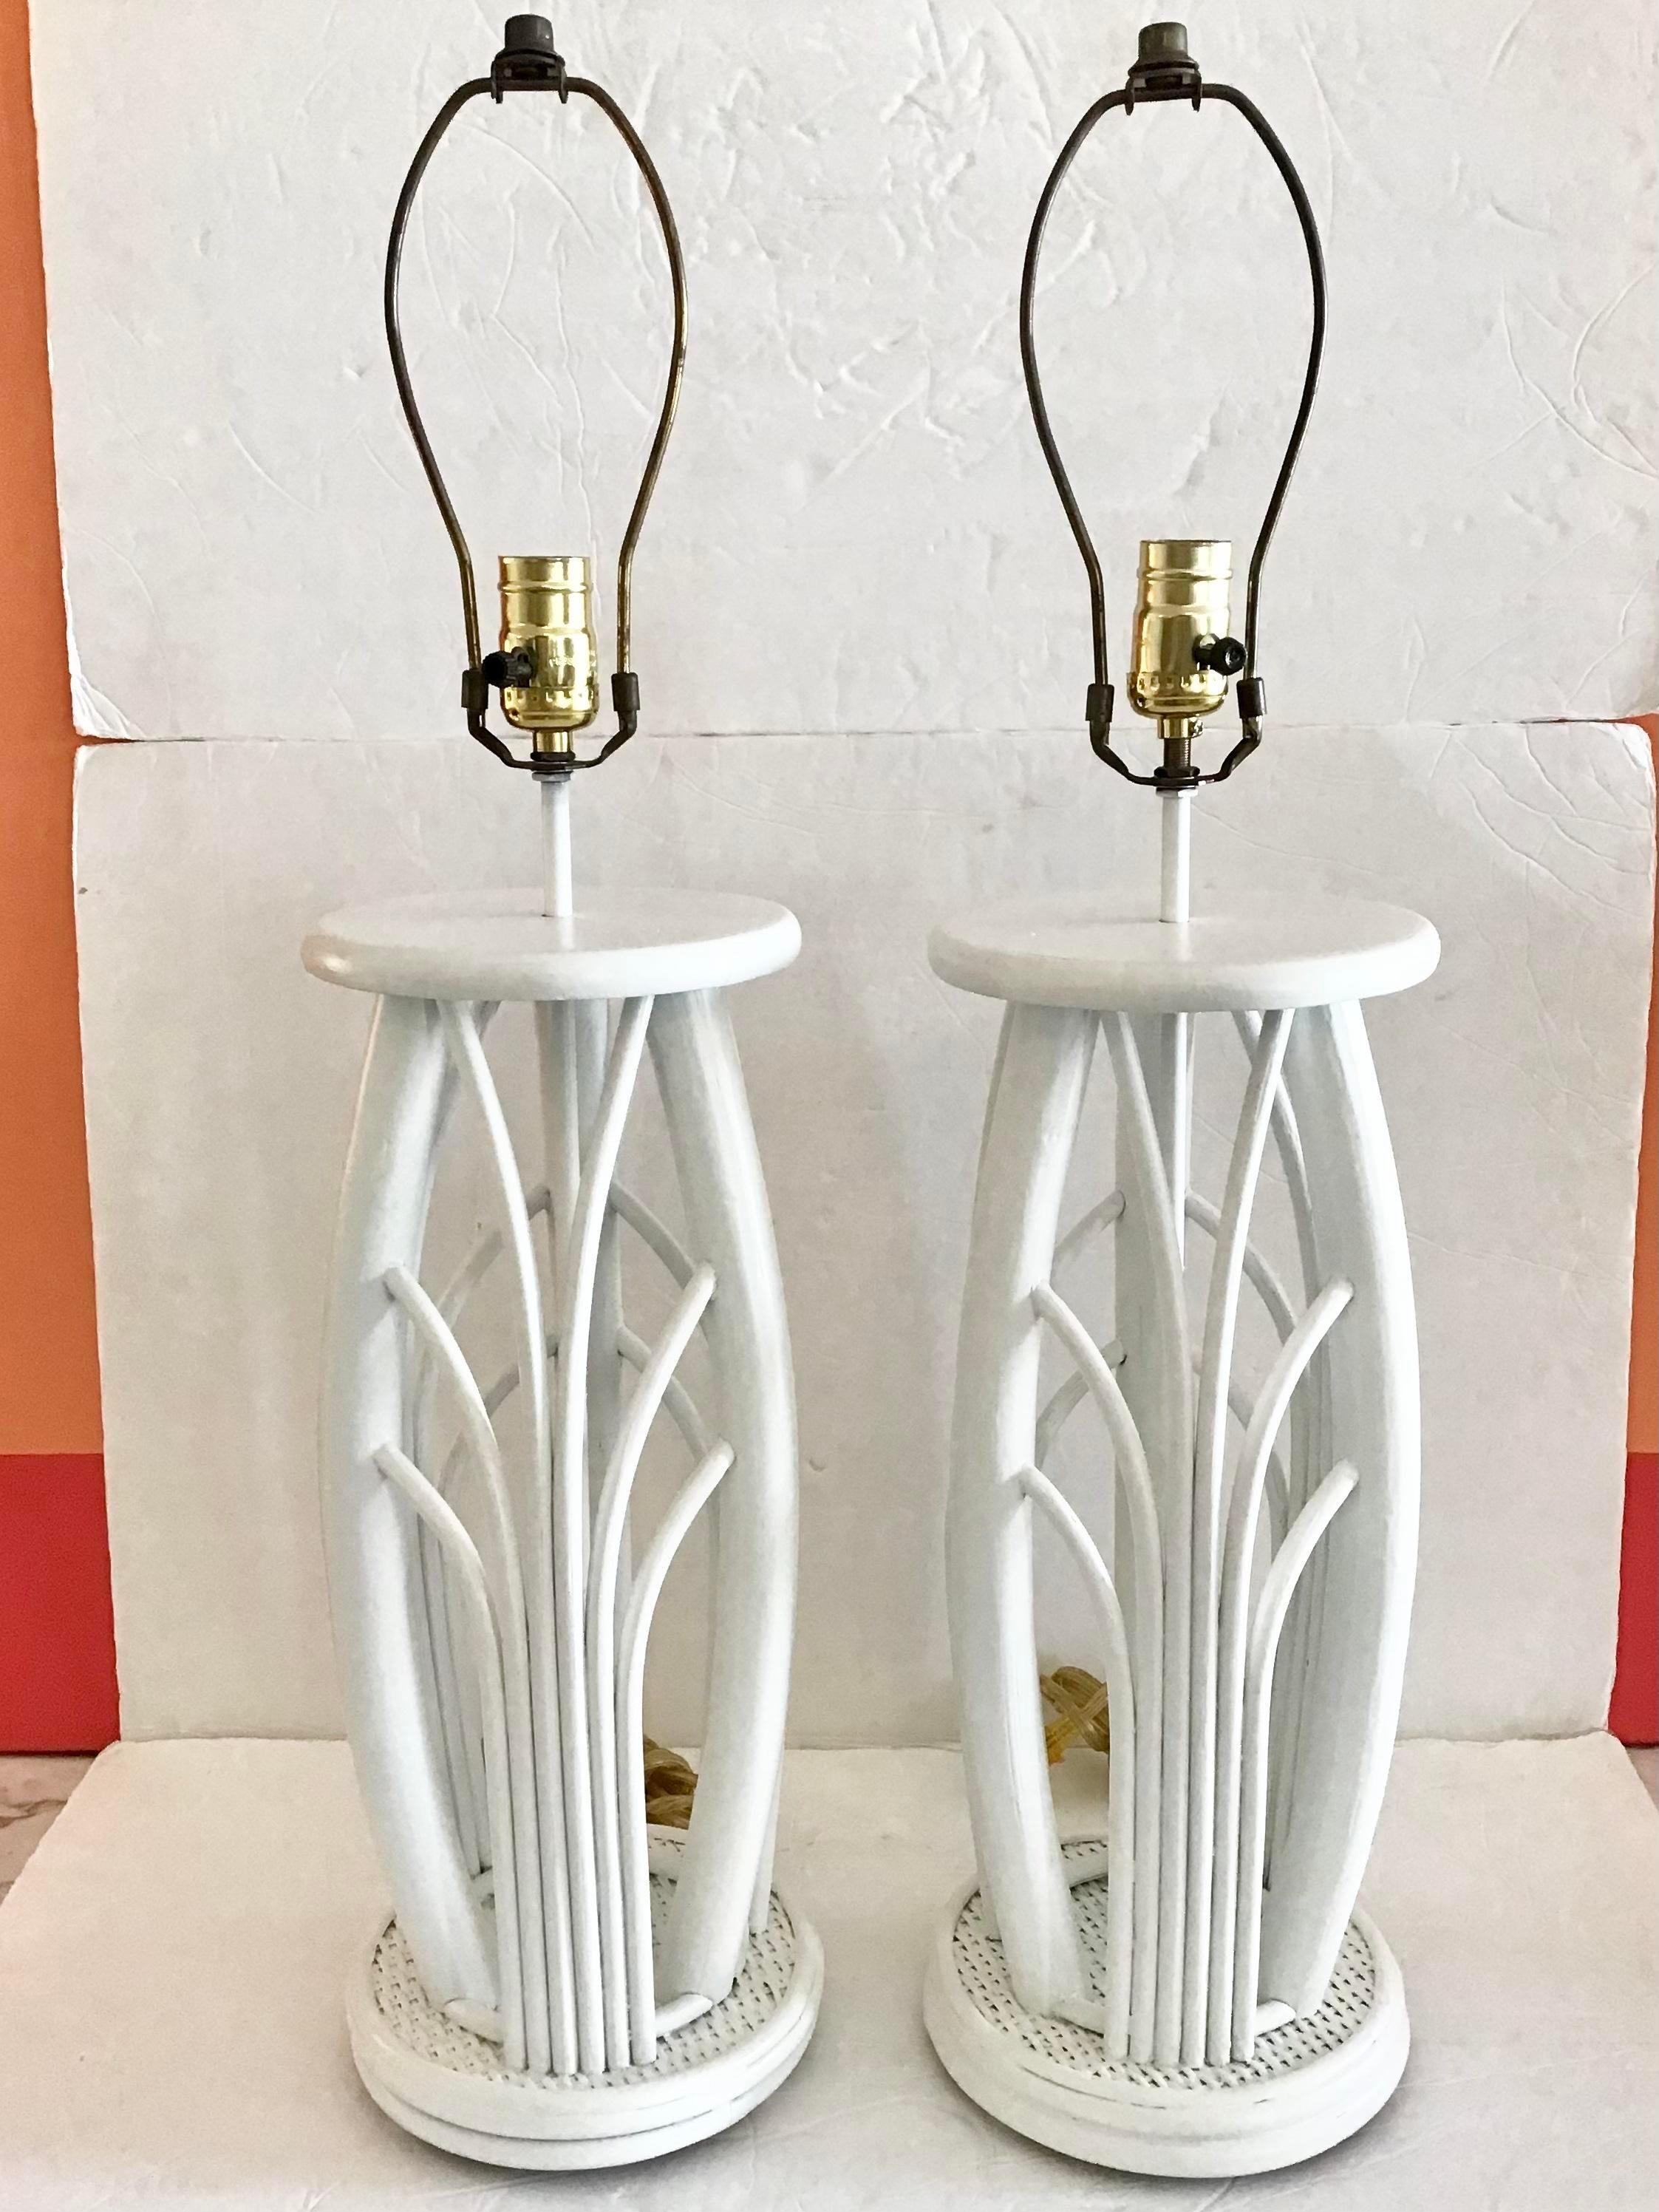 Fabulous pair of freshly lacquered in white boho chic pencil reed table lamps. Nice pencil reed details. Add this pair to your boho chic inspired interiors. Does not include shades so add a pair of your choice.